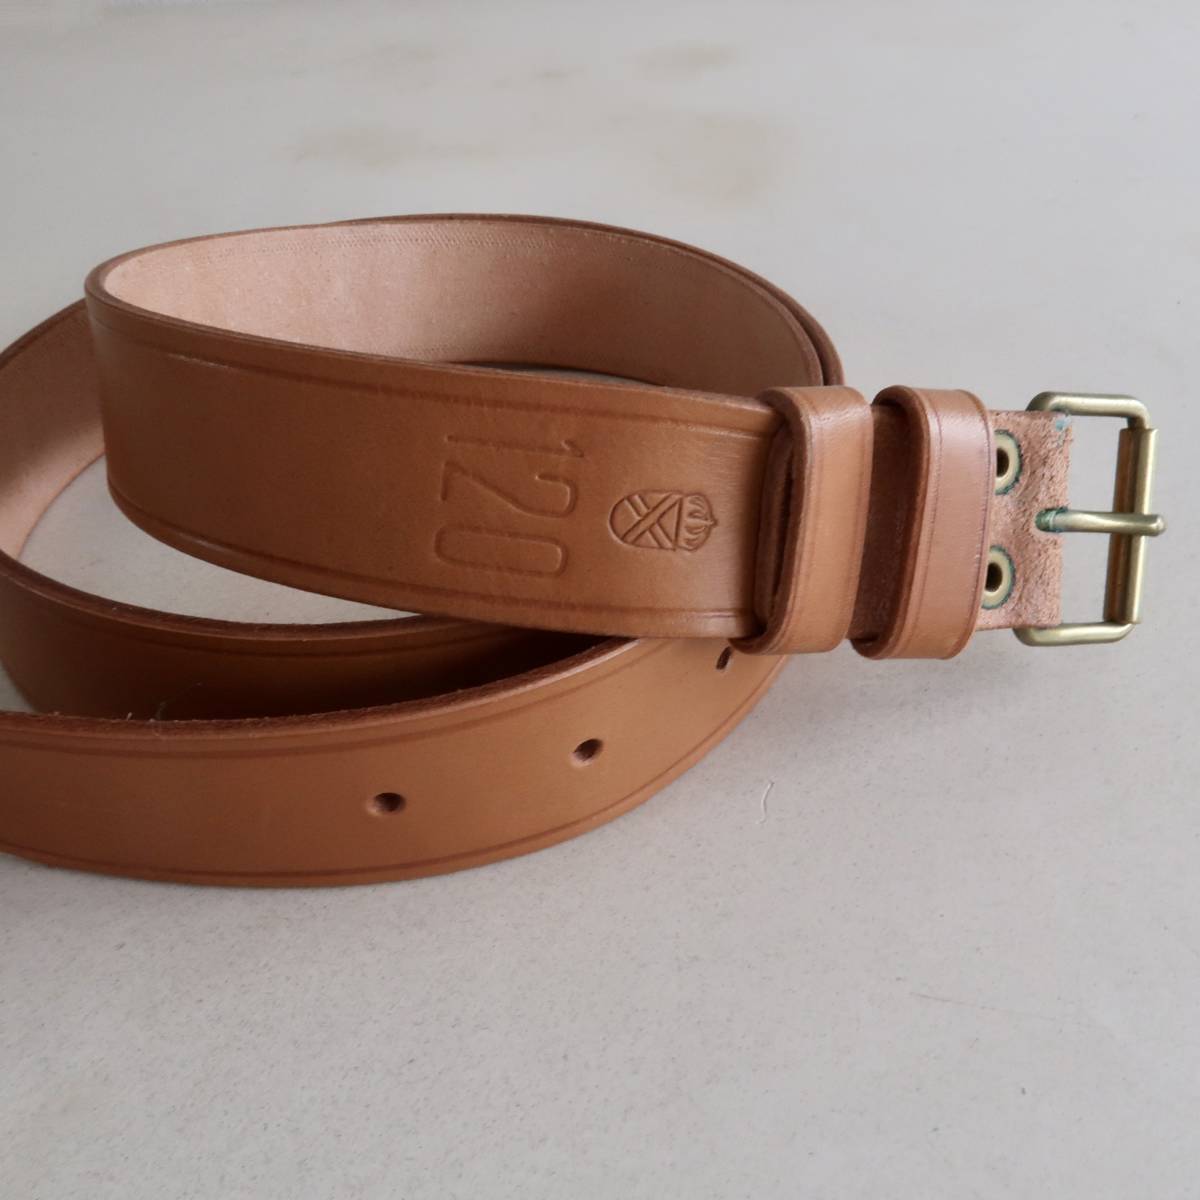 DEADSTOCK 70\'s 80\'s Sweden army sibi Rudy fence natural leather belt inscription 120 W34 - W44 degree / Vintage cow leather W35W36W38 largish 